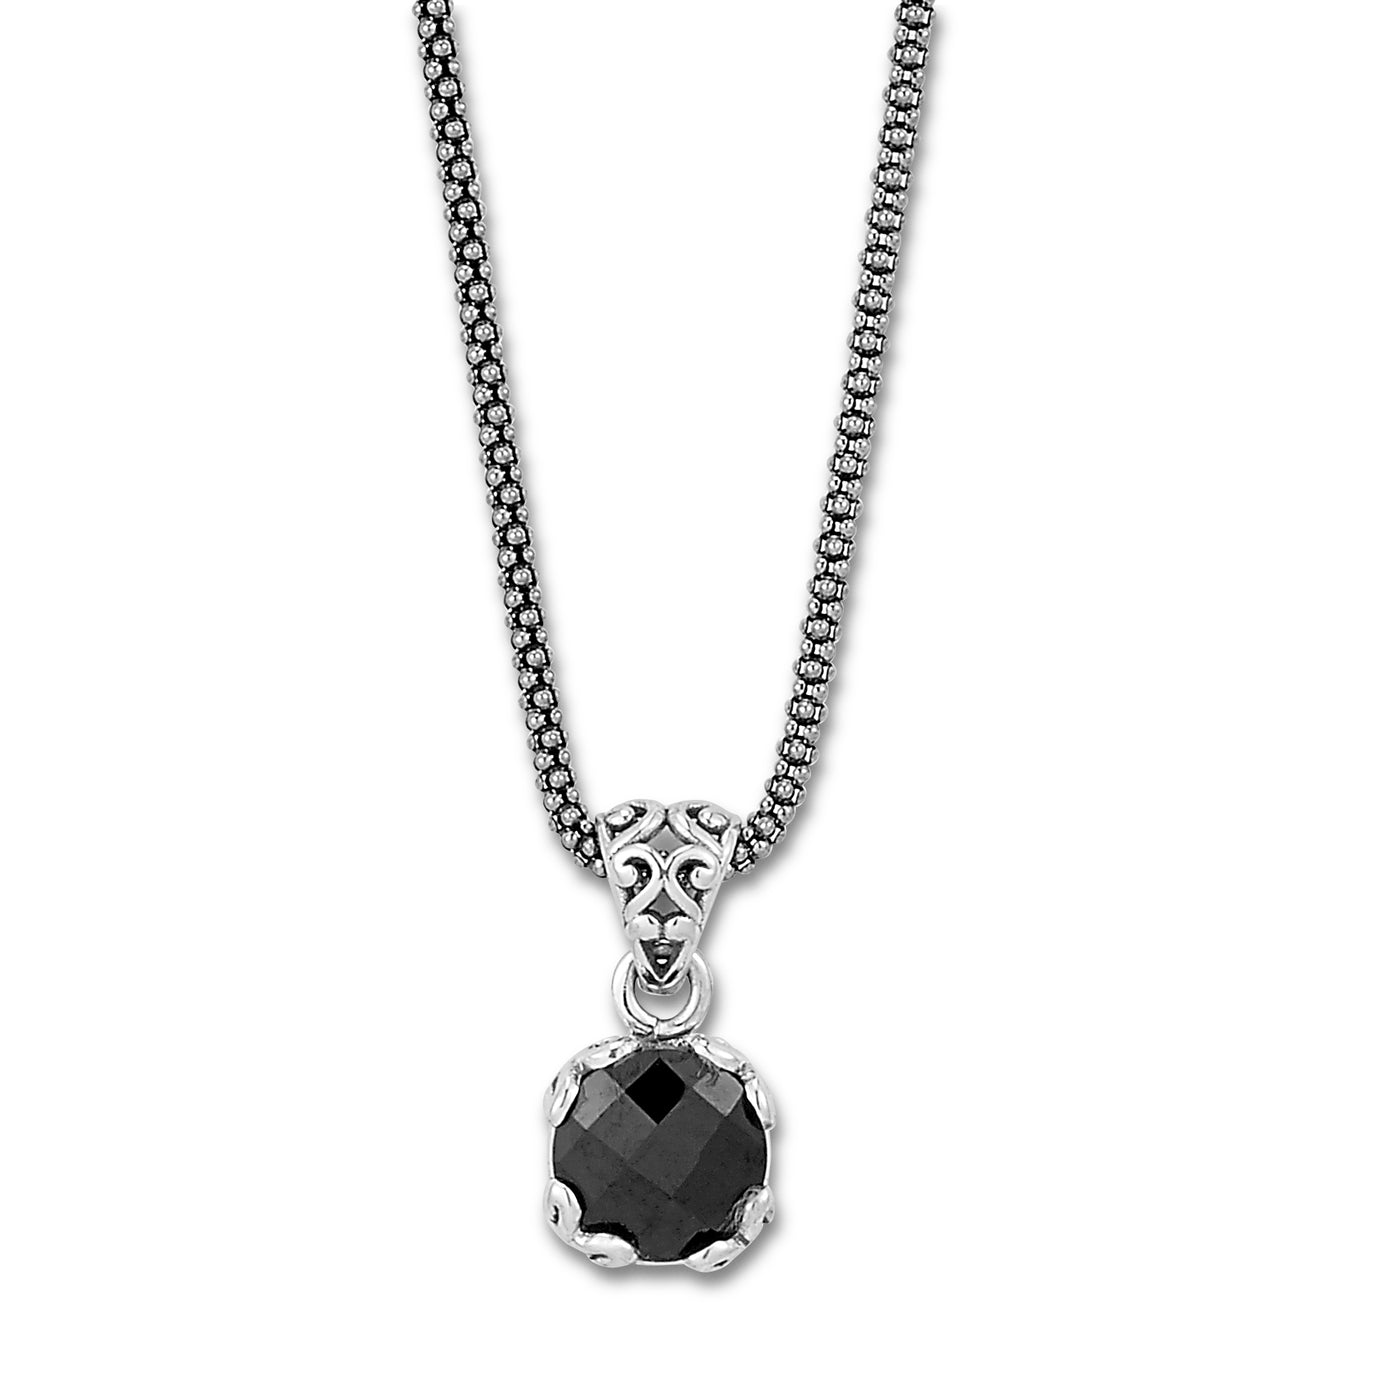 SS 7MM ROUND BLACK SPINEL PENDANT ON CHAIN